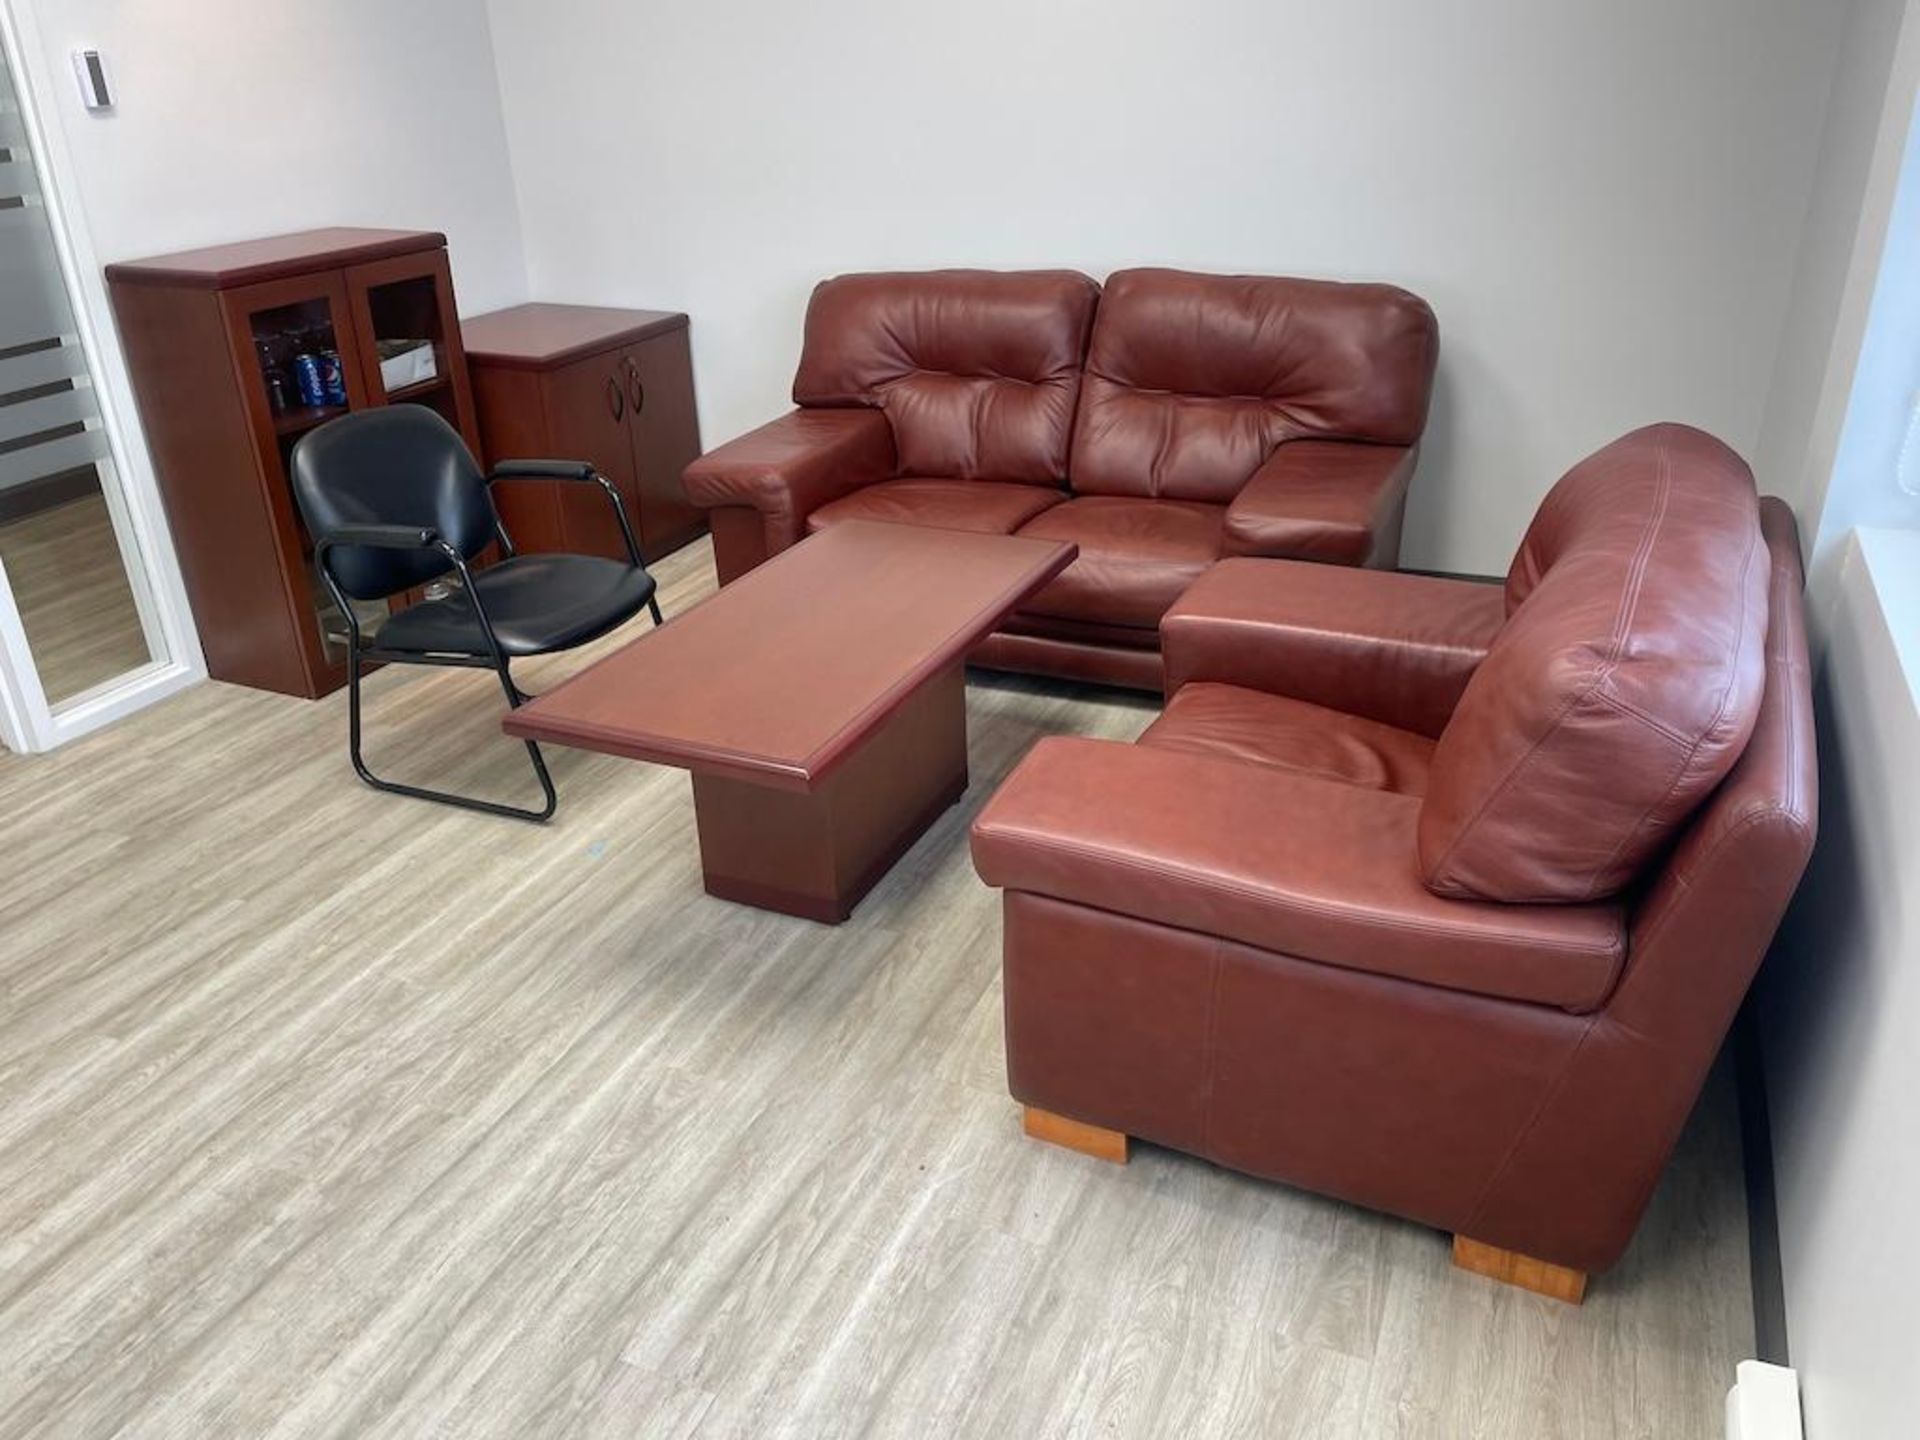 LOT EXECUTIVE OFFICE W DESK, CREDENZA, CHAIRS, SOFA, COFFEE TABLE [TROIS RIVIERES]*PLEASE NOTE, EXCL - Image 2 of 3